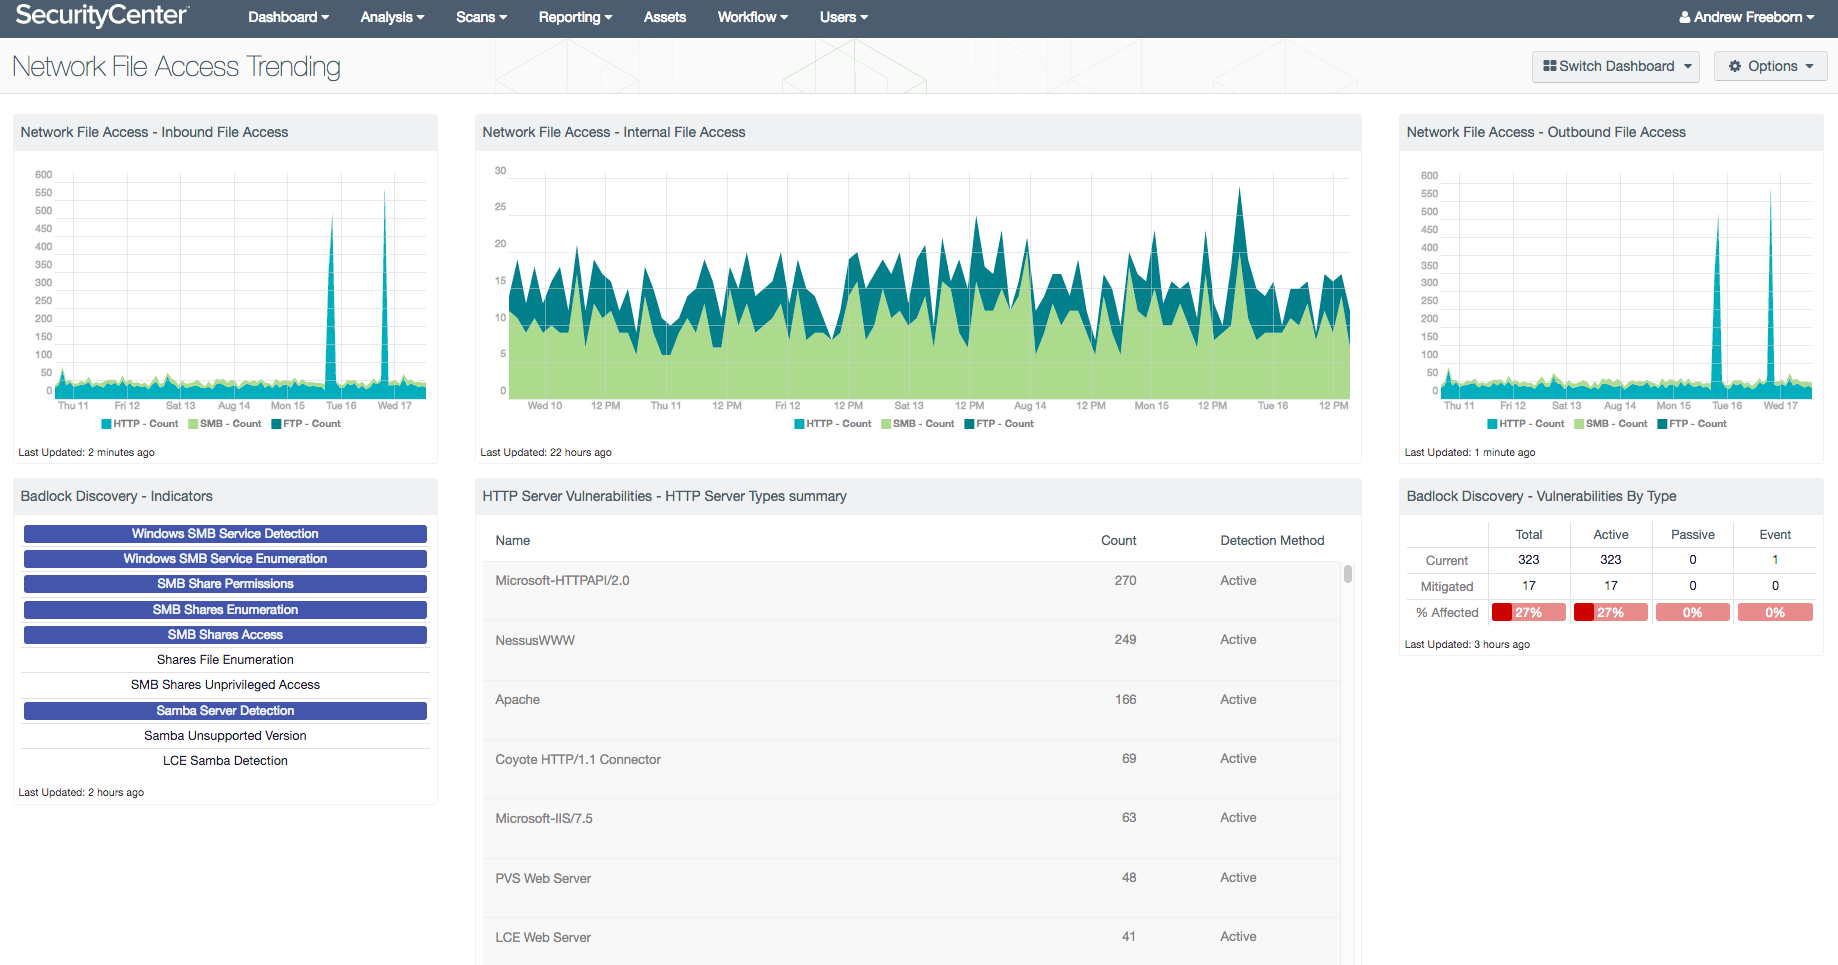 Network File Access Trending Dashboard